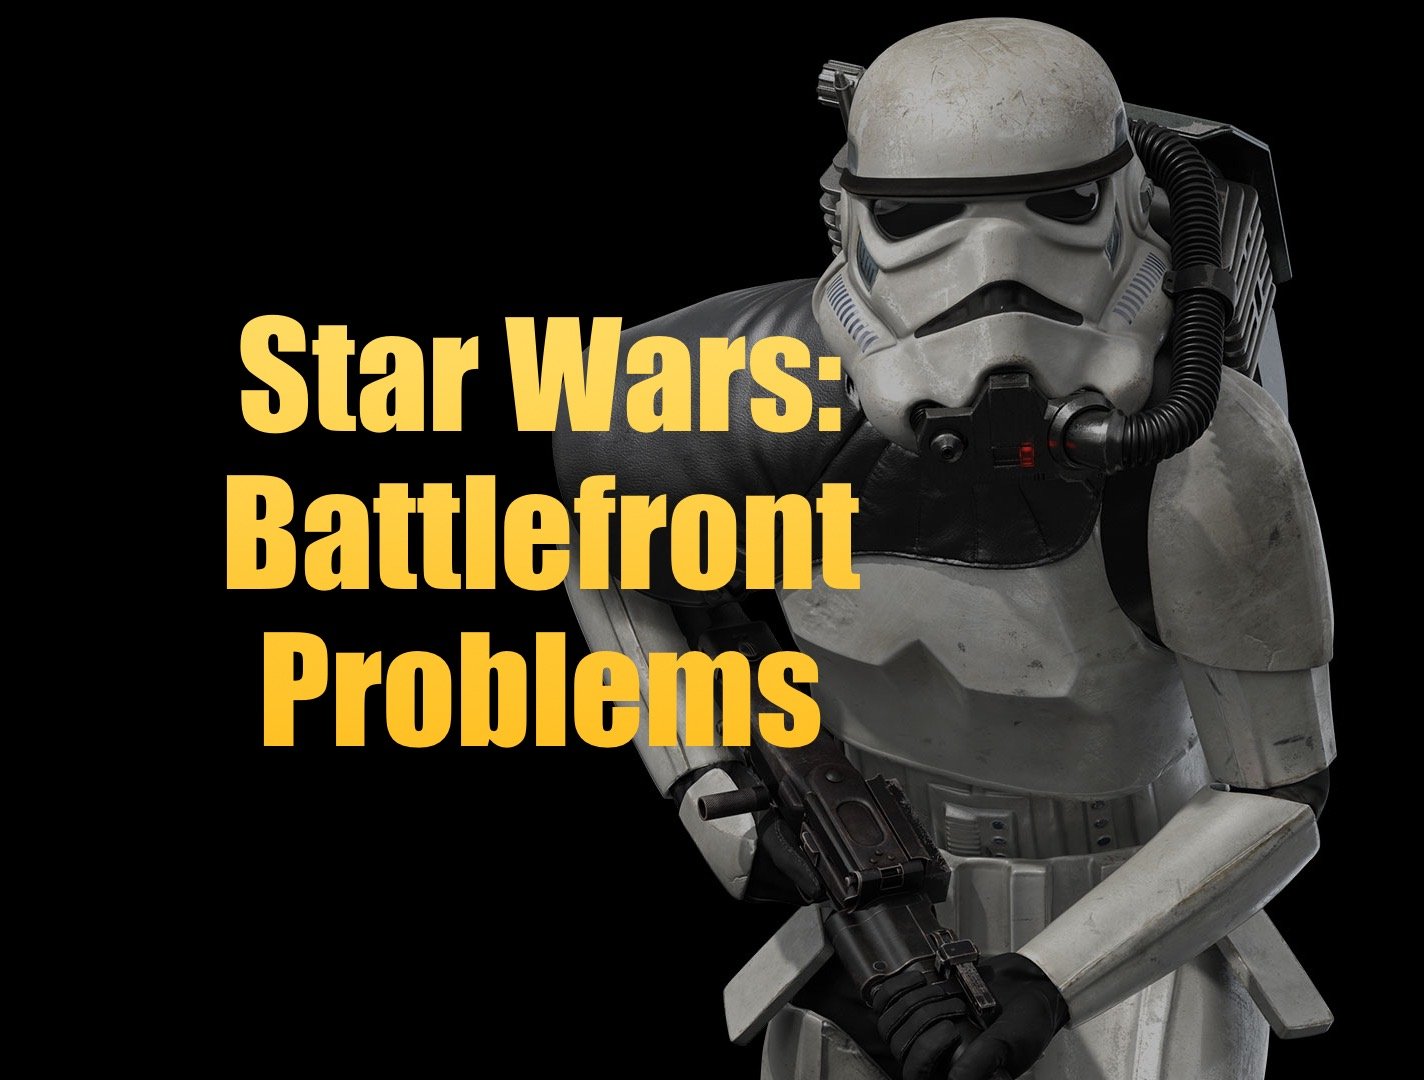 What you need to know about Star Wars: Battlefront problems.